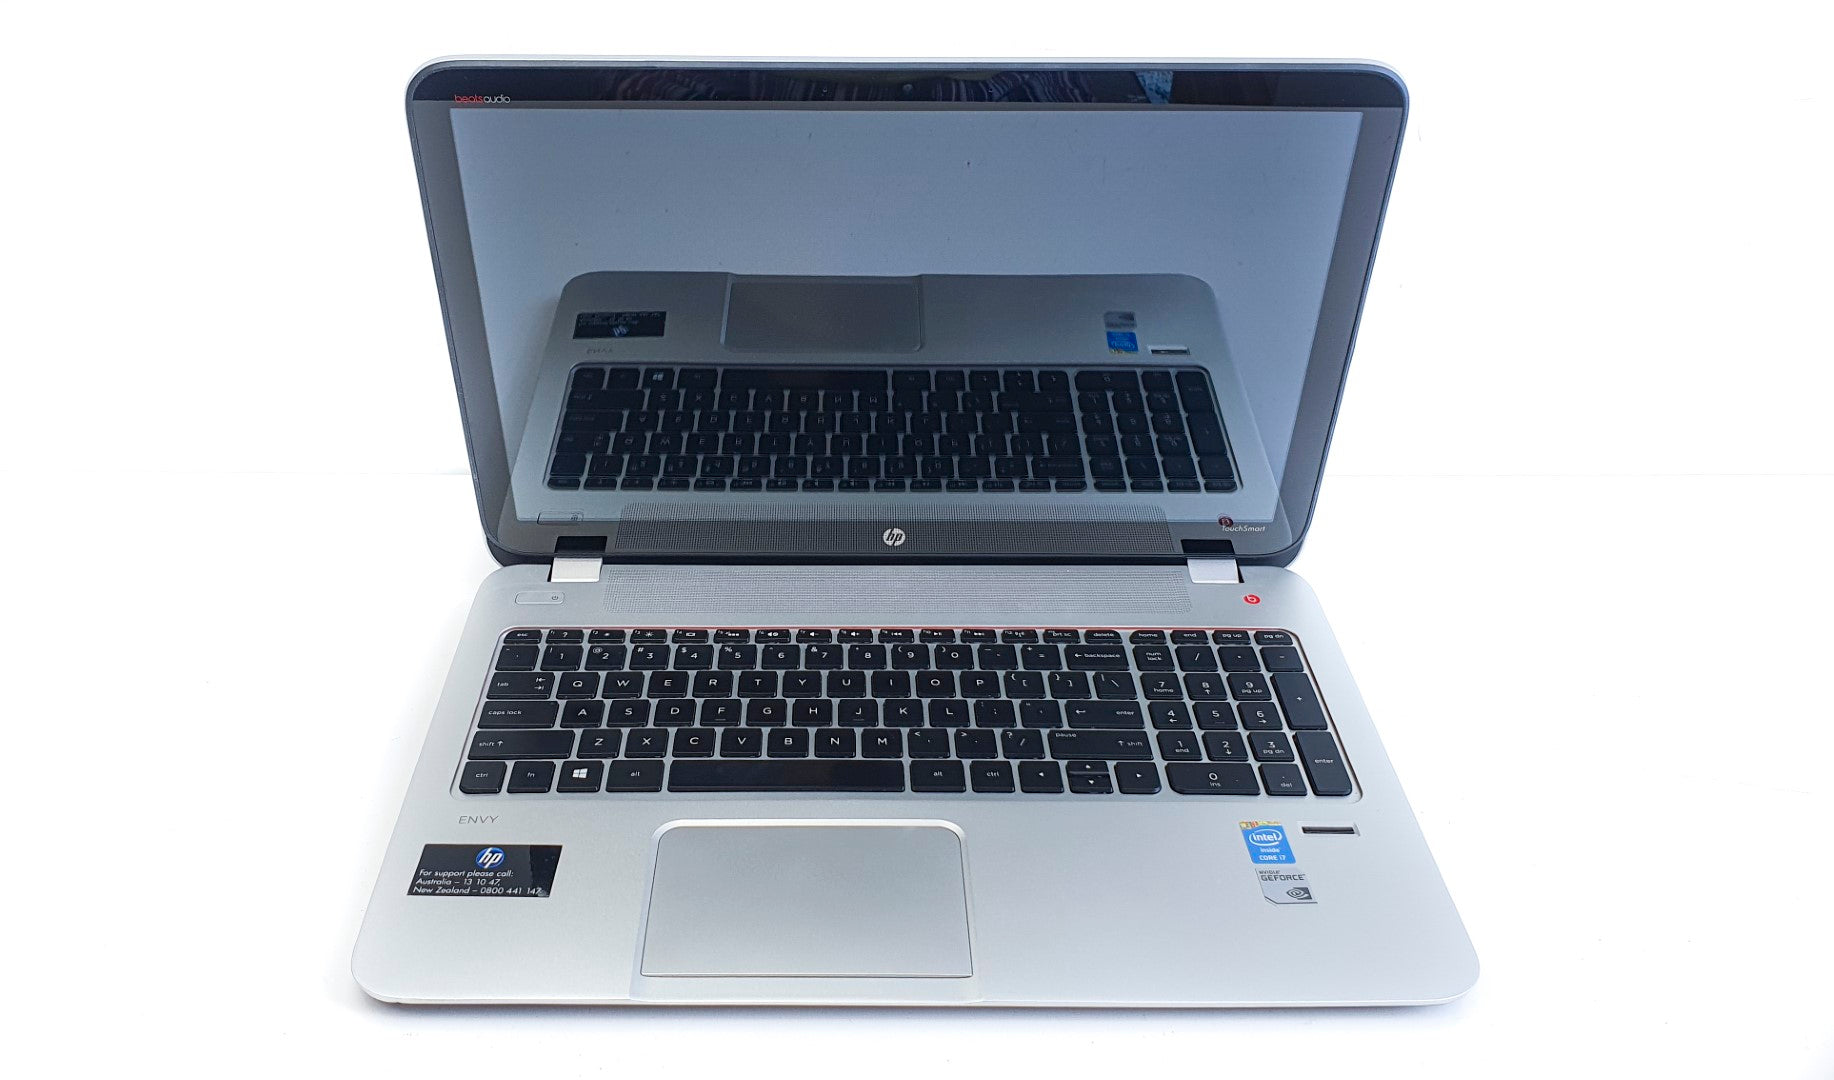 HP Envy 15, i7-4700MQ (Brand new Battery), 8GB, 256GB SSD - Refurbished Excellent Condition